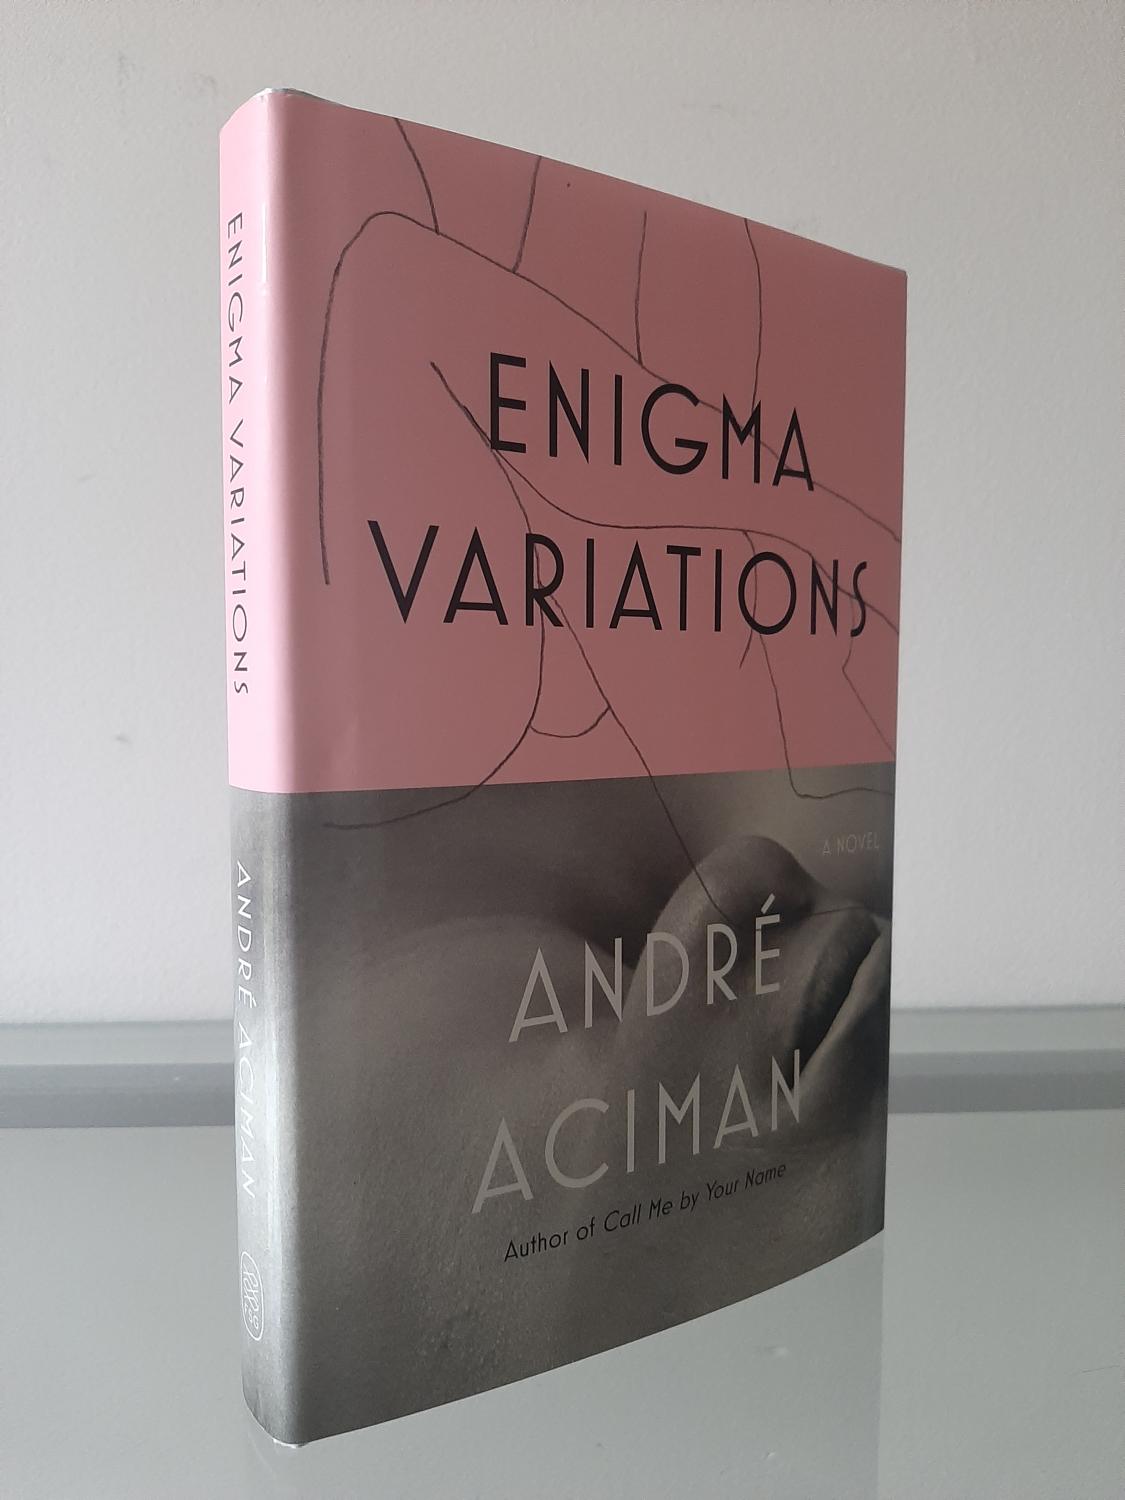 Author(s)　Aciman:　Andre　First　MDS　by　Enigma　by　Edition,　Variations　(2017)　Signed　Fine　Hardcover　BOOKS